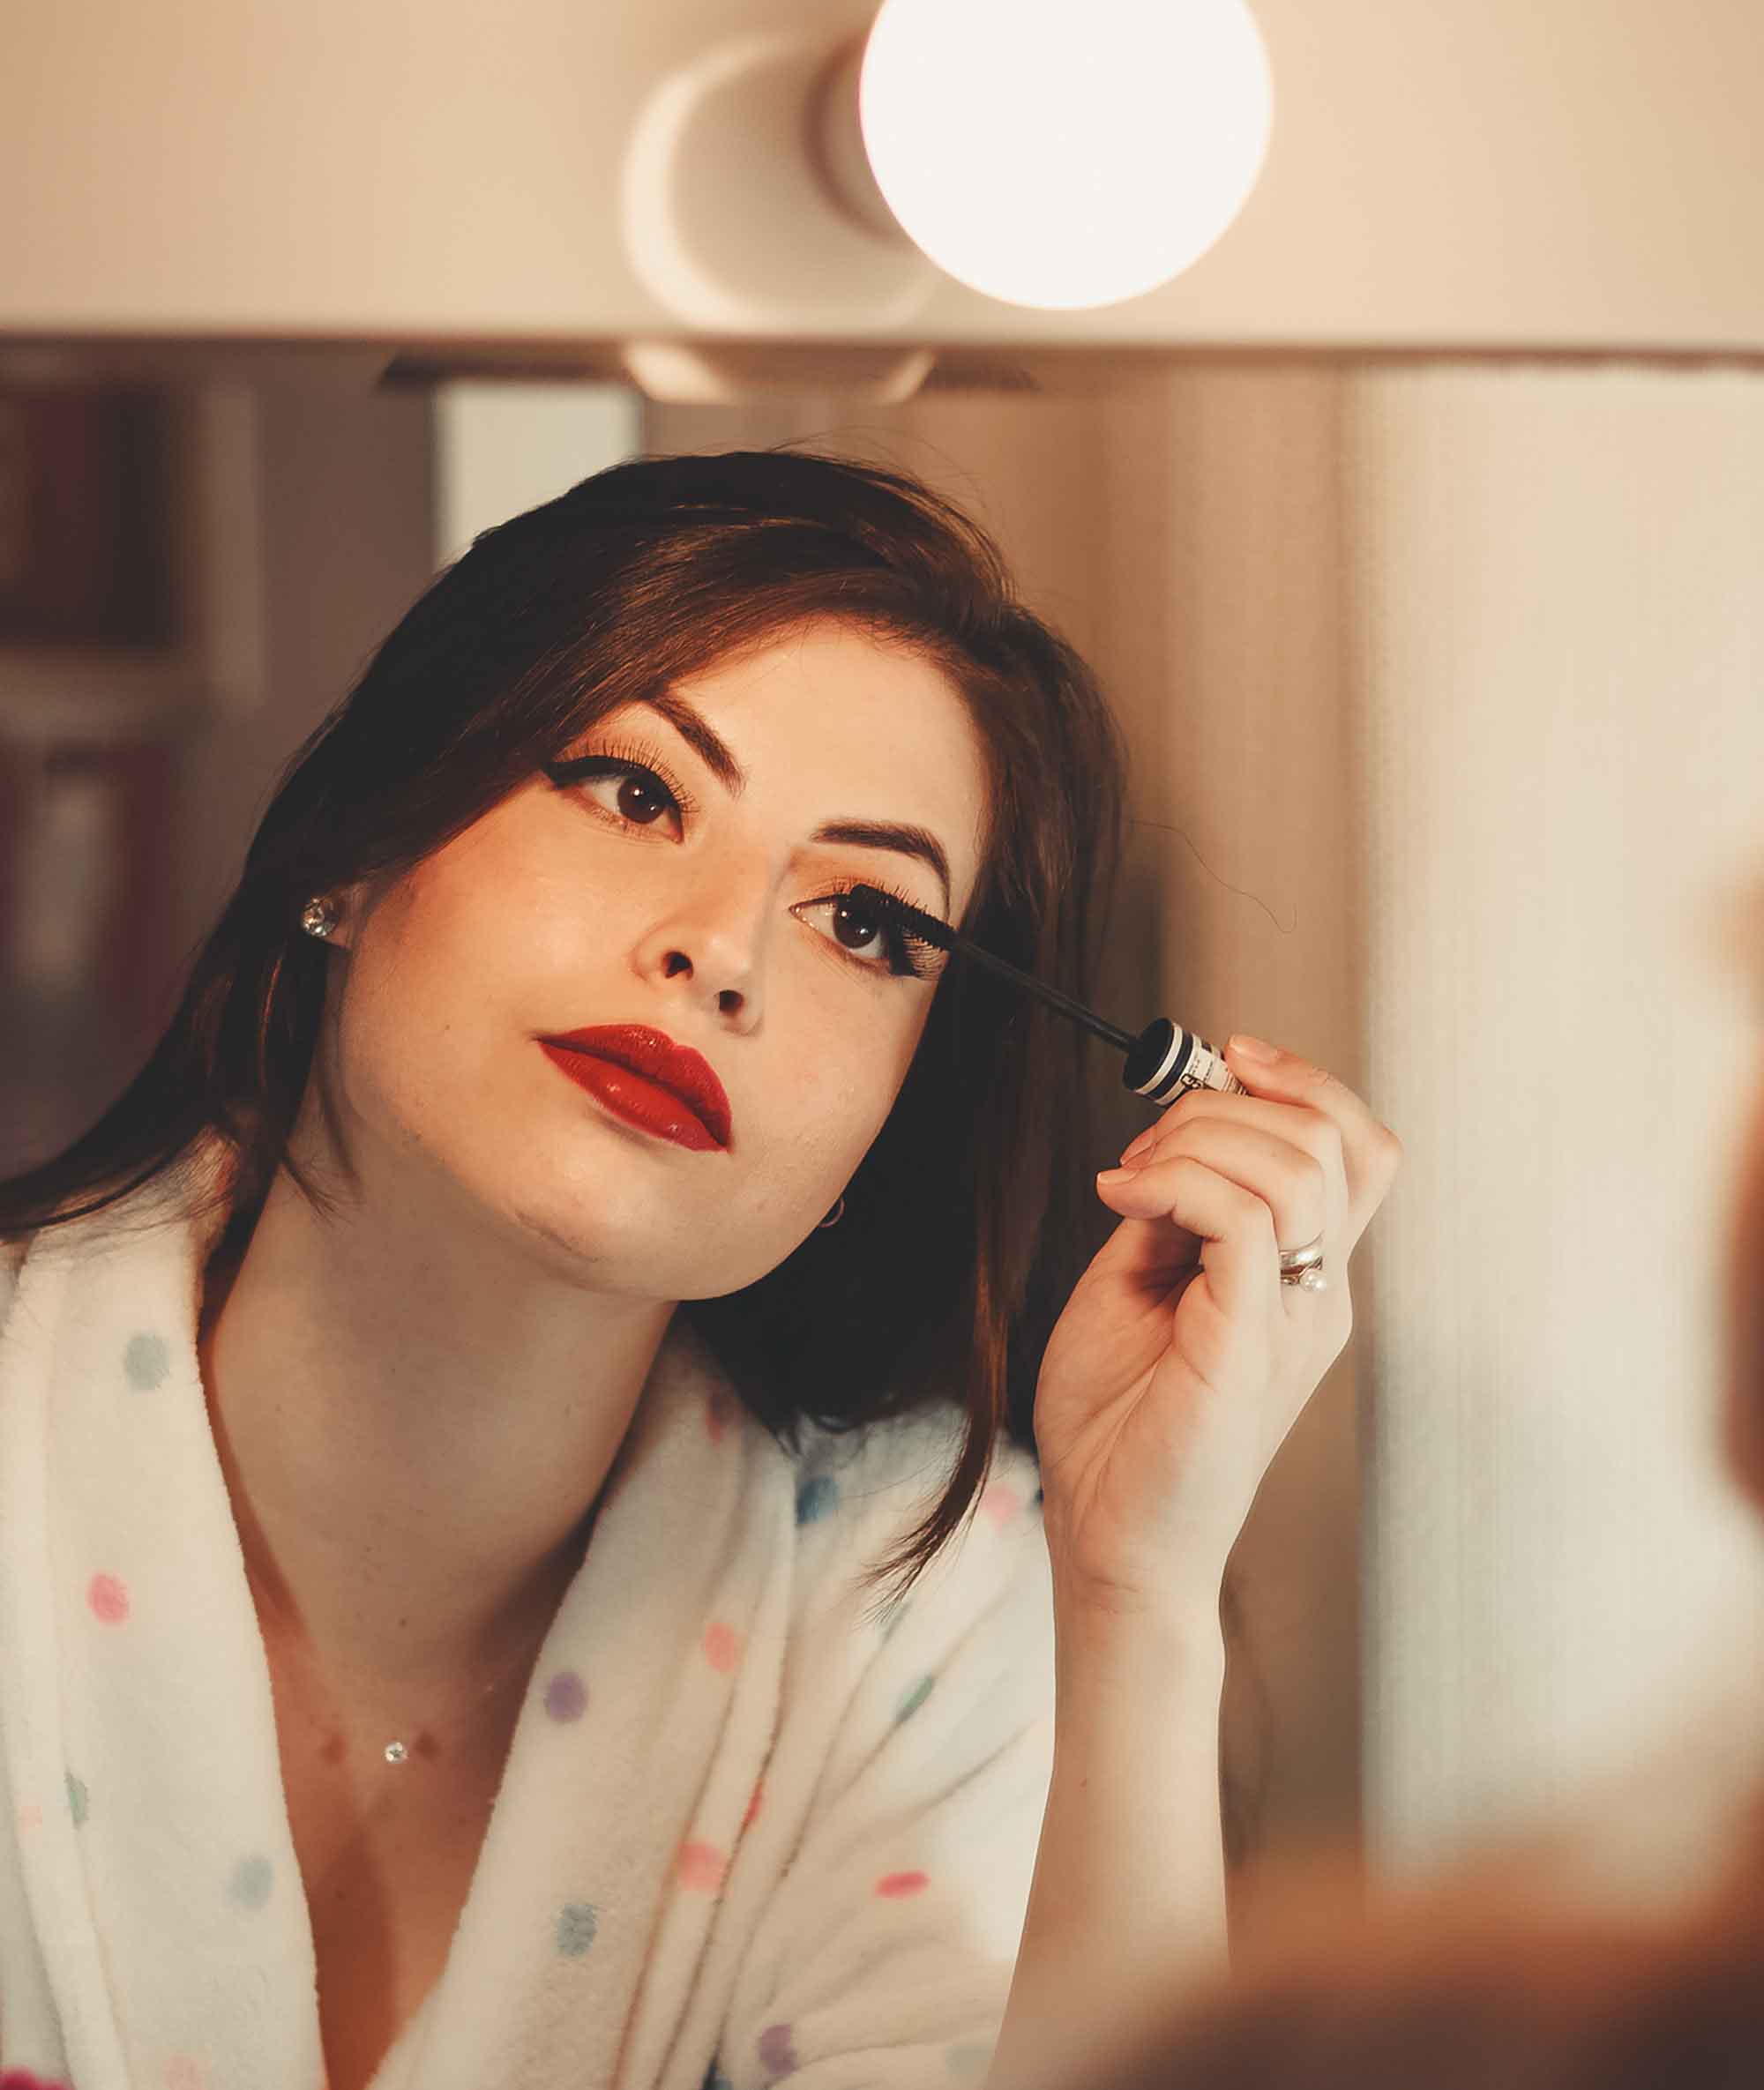 Best Lighting For Makeup, What Is The Best Lighting For A Makeup Mirror